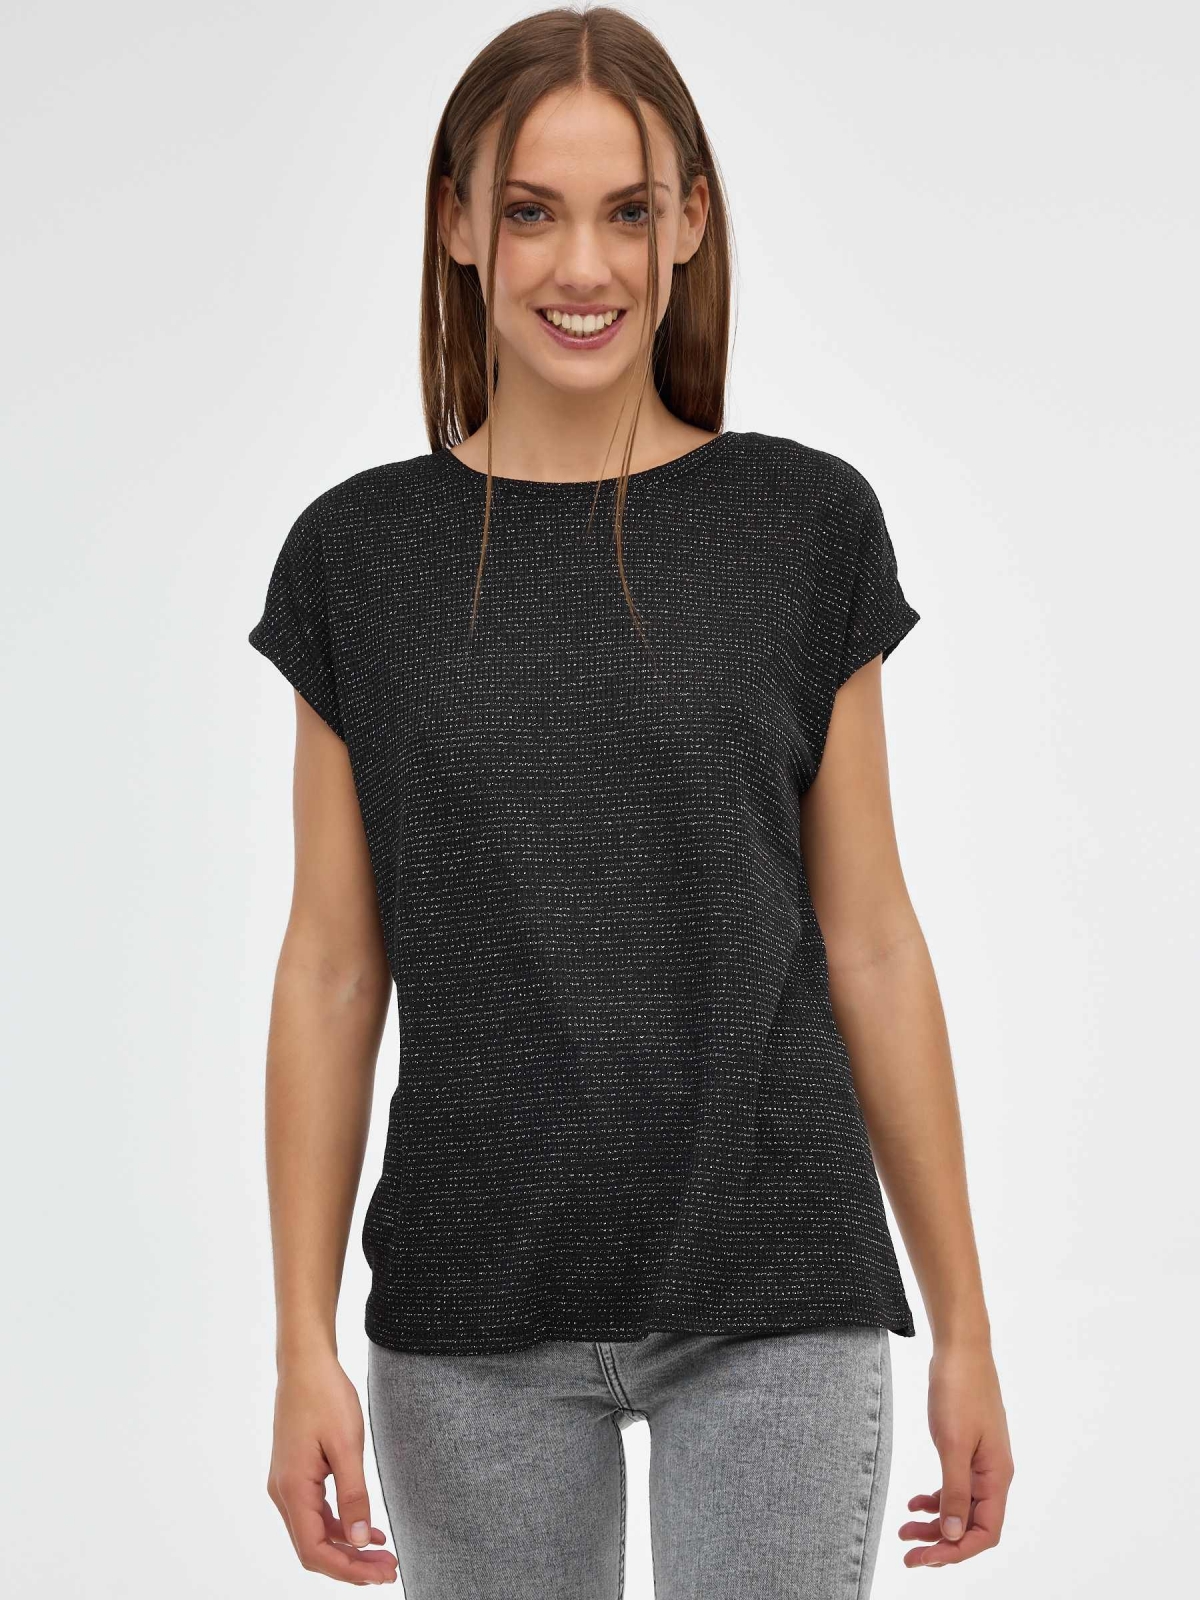 Metallic fabric T-shirt black middle front view